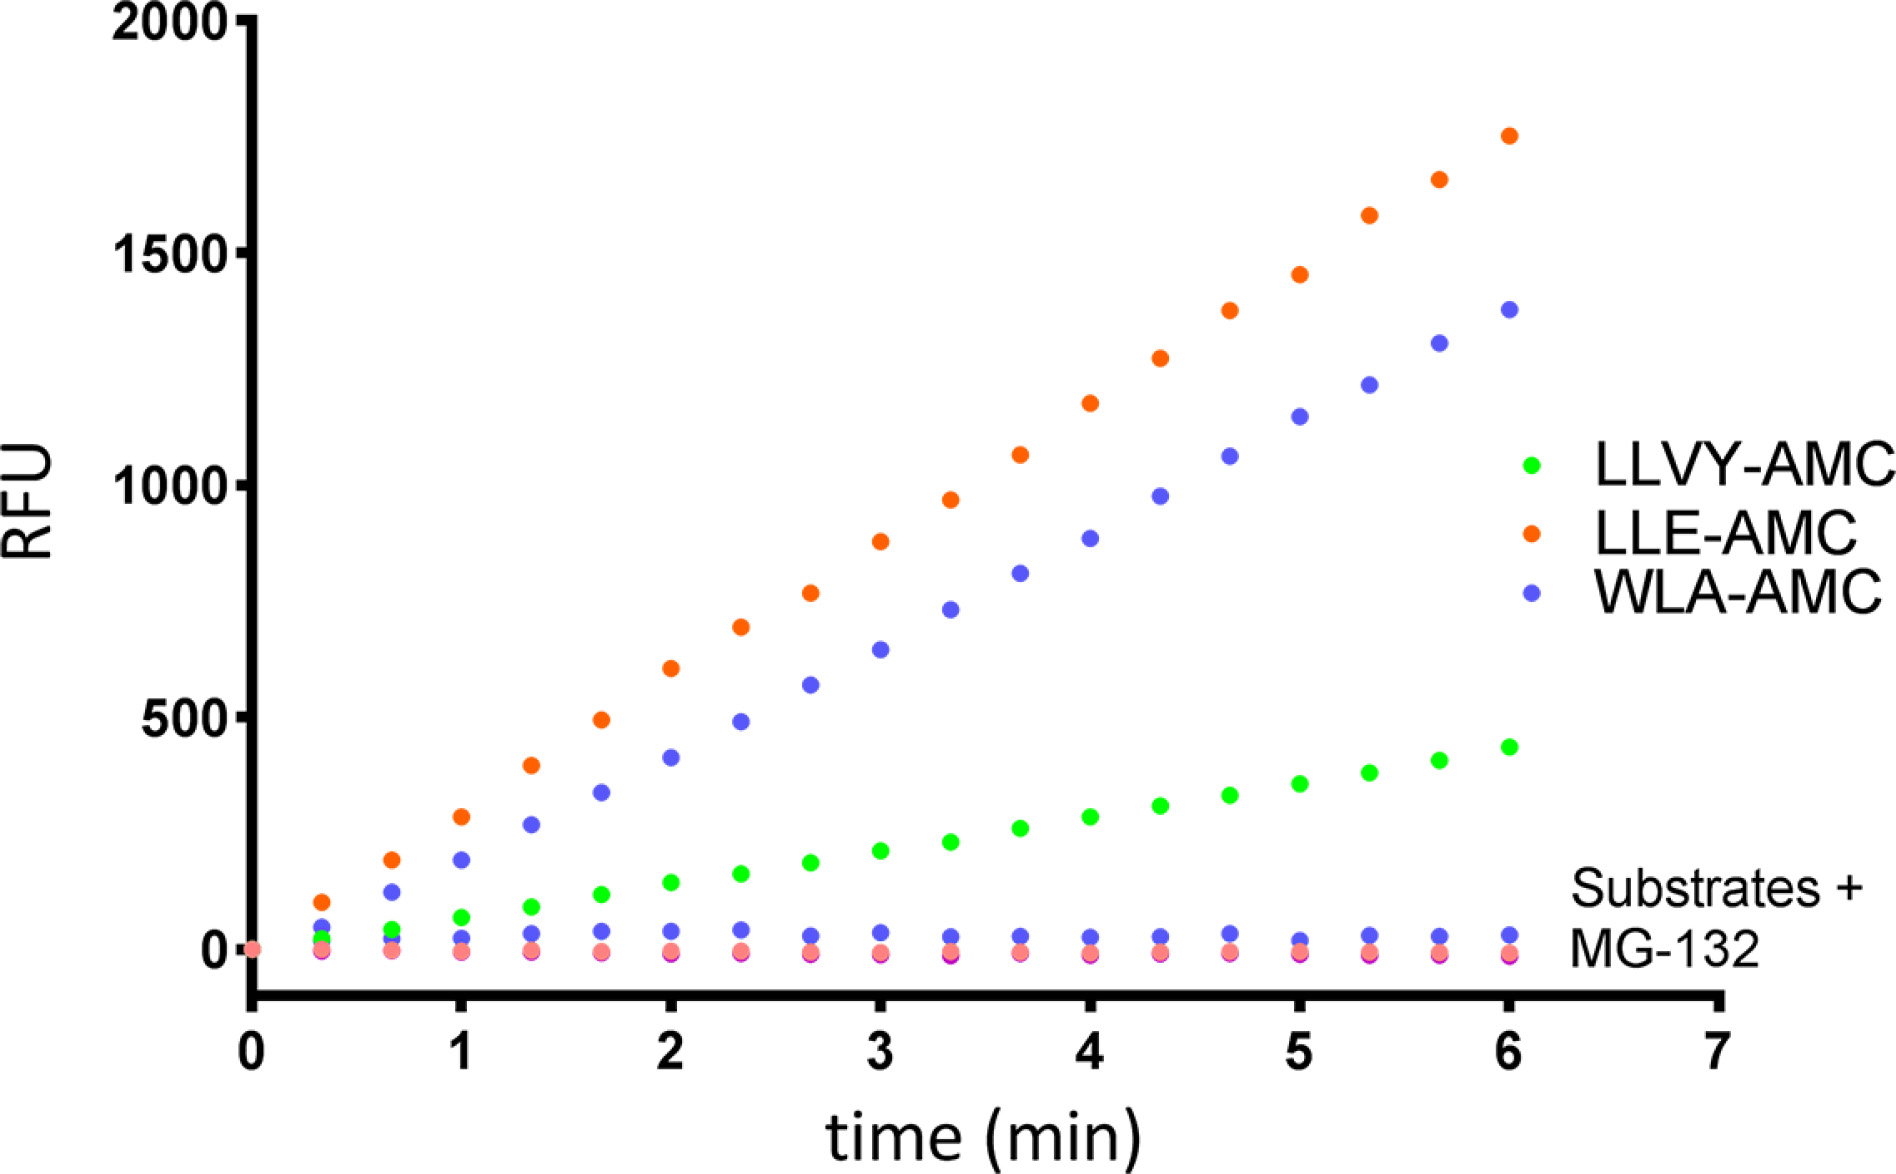 20S Proteasome Activity Raw Data Output: Several wells of Proteasome shown digesting LLVY, WLA, and LLE-AMC over time +/- 1x (40microM) inhibitor (MG-132).